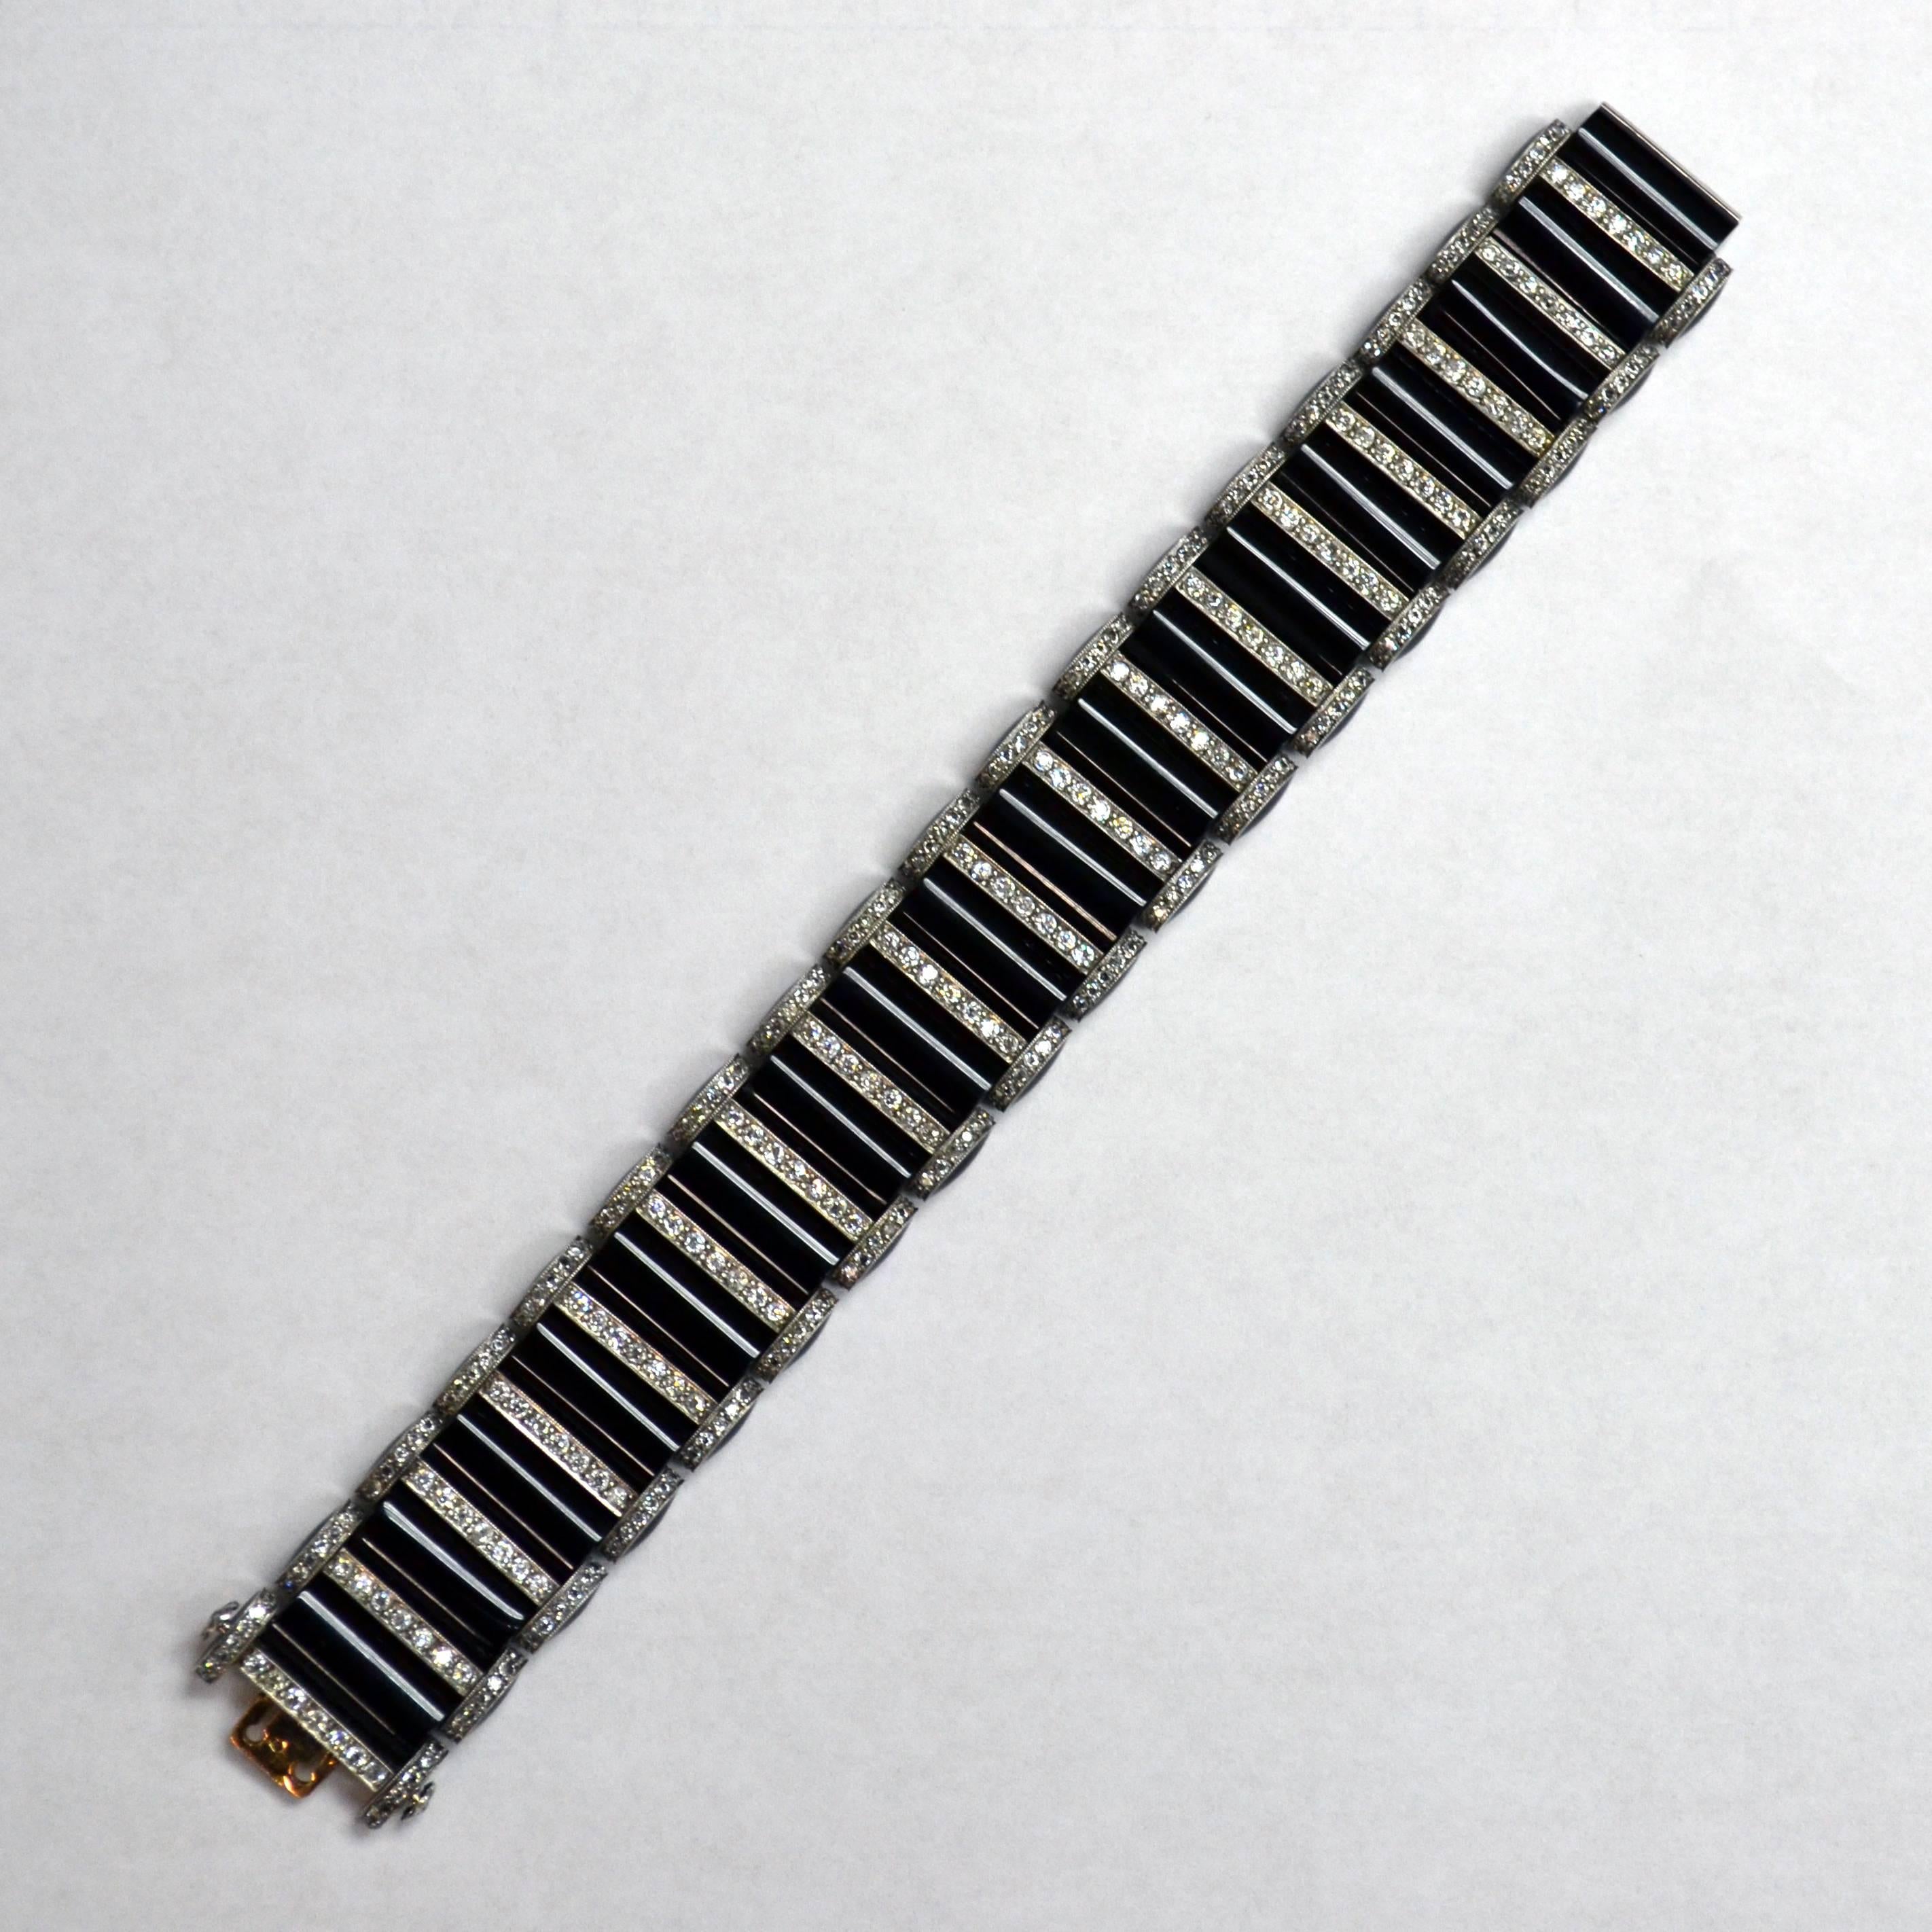 Bracelet with box clasp closure in platinum, set with onyx segments, old european-cut diamonds spacing (5.00 carats), and black enamel sides.

Length of bracelet: 7 inches. 
Partial maker's mark, French assay mark. Circa 1920. 